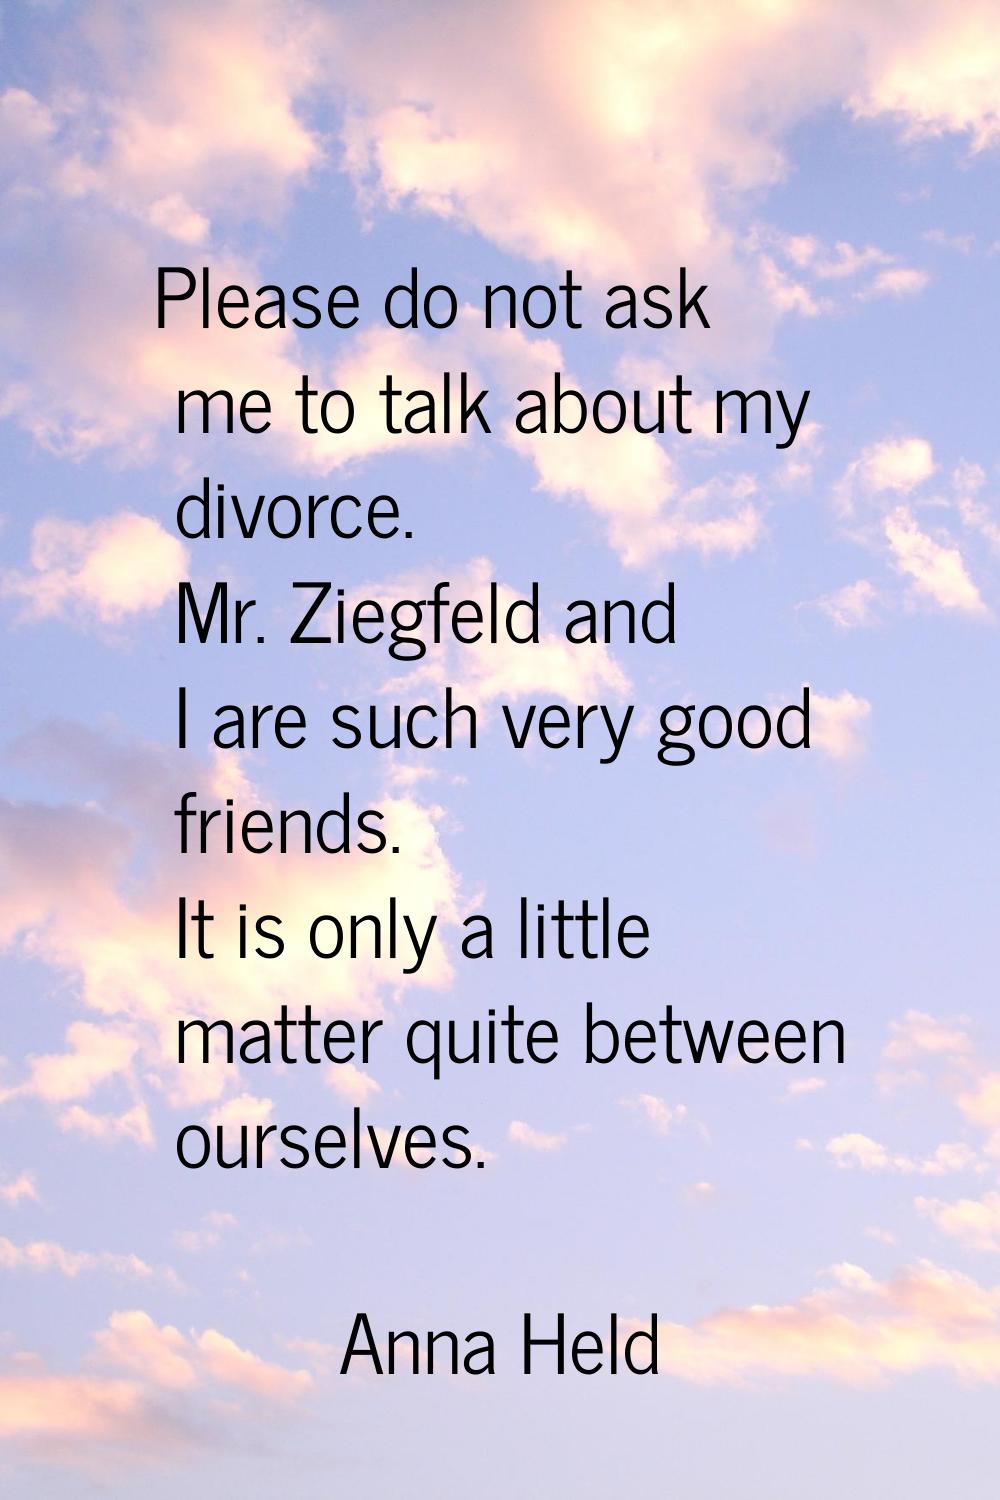 Please do not ask me to talk about my divorce. Mr. Ziegfeld and I are such very good friends. It is